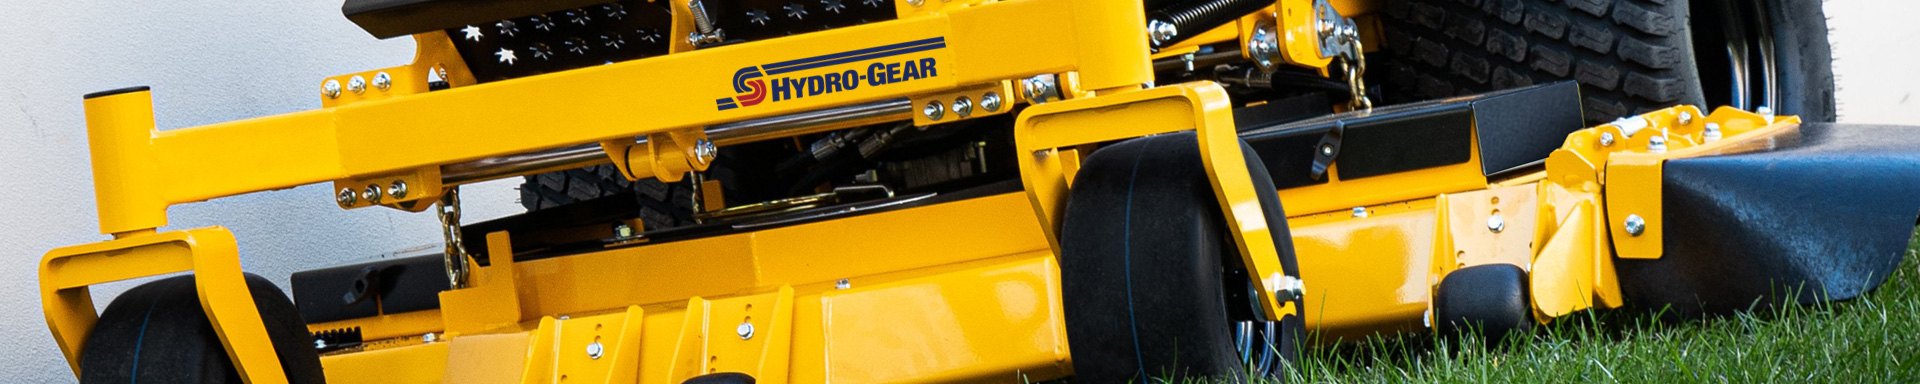 Hydro Gear Outdoor Power Equipment Parts